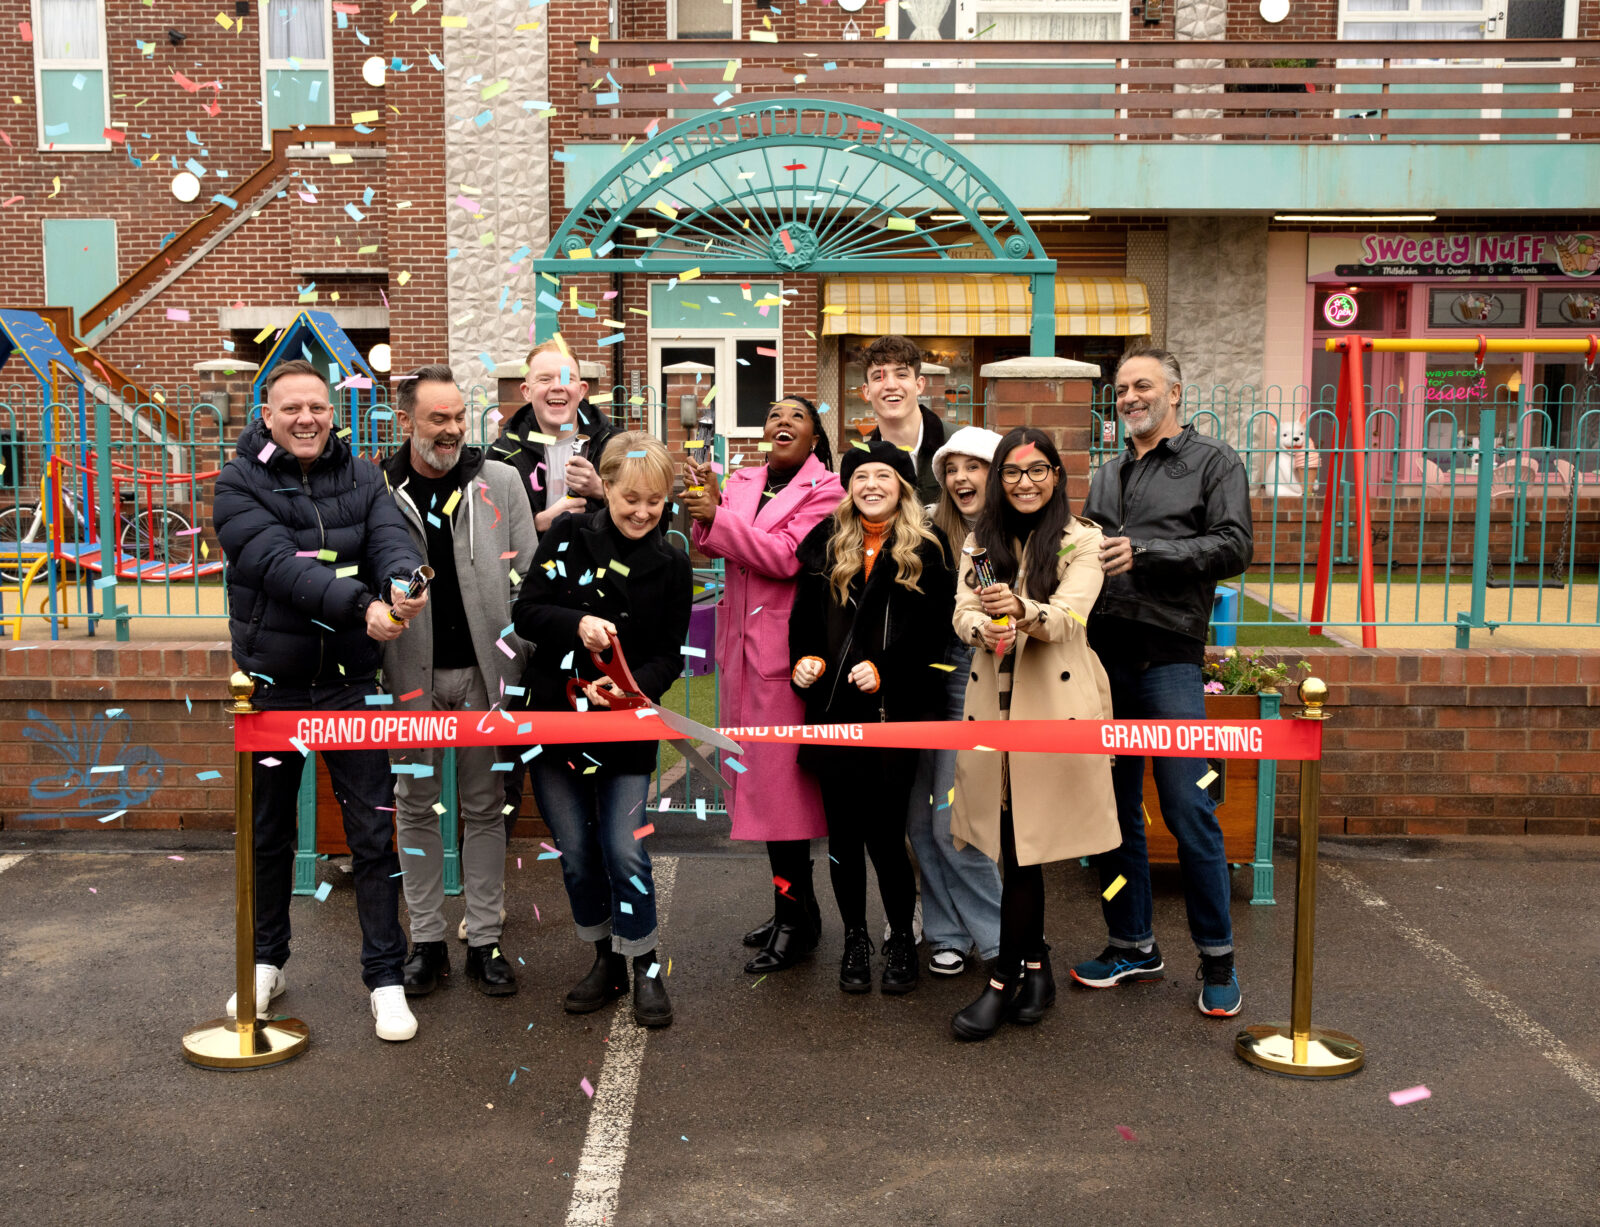 Weatherfield Precinct being unveiled by Coronation Street cast